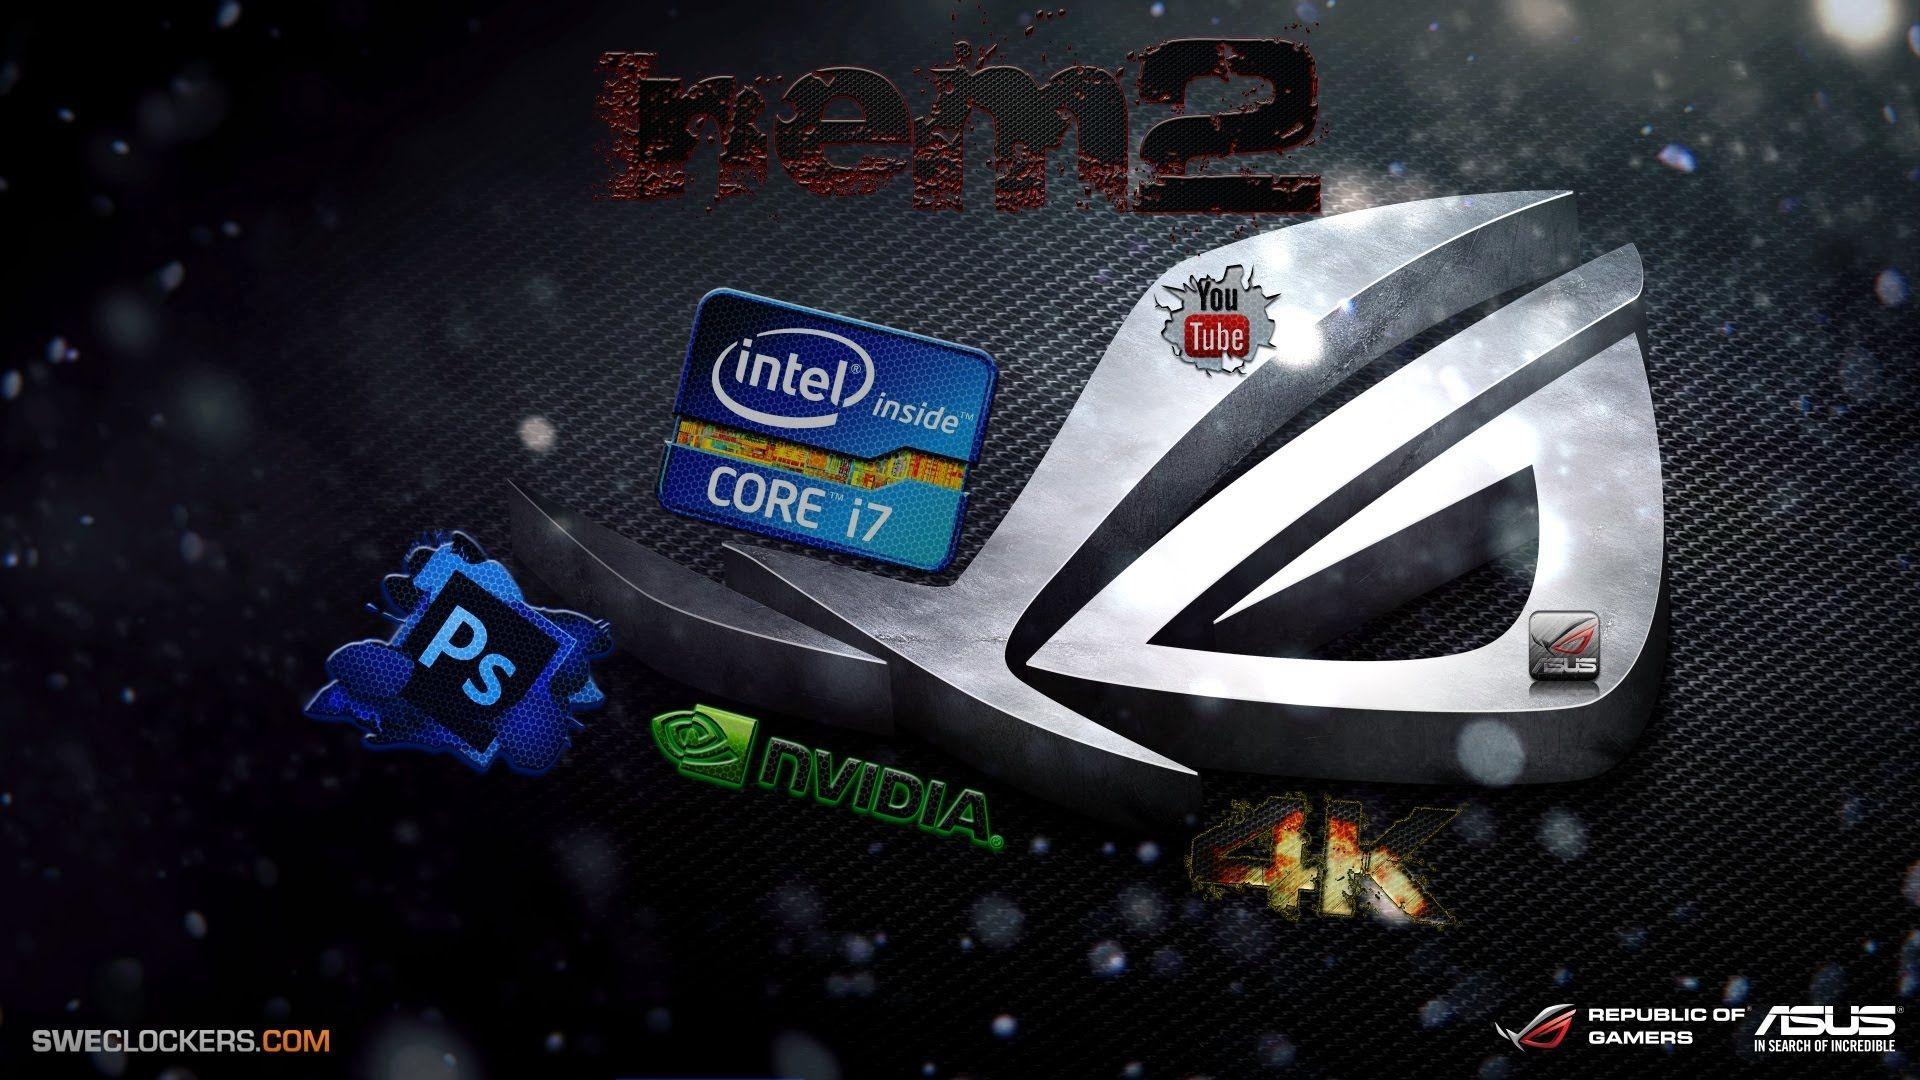 Intel I7 Wallpapers Top Free Intel I7 Backgrounds Wallpaperaccess 9809